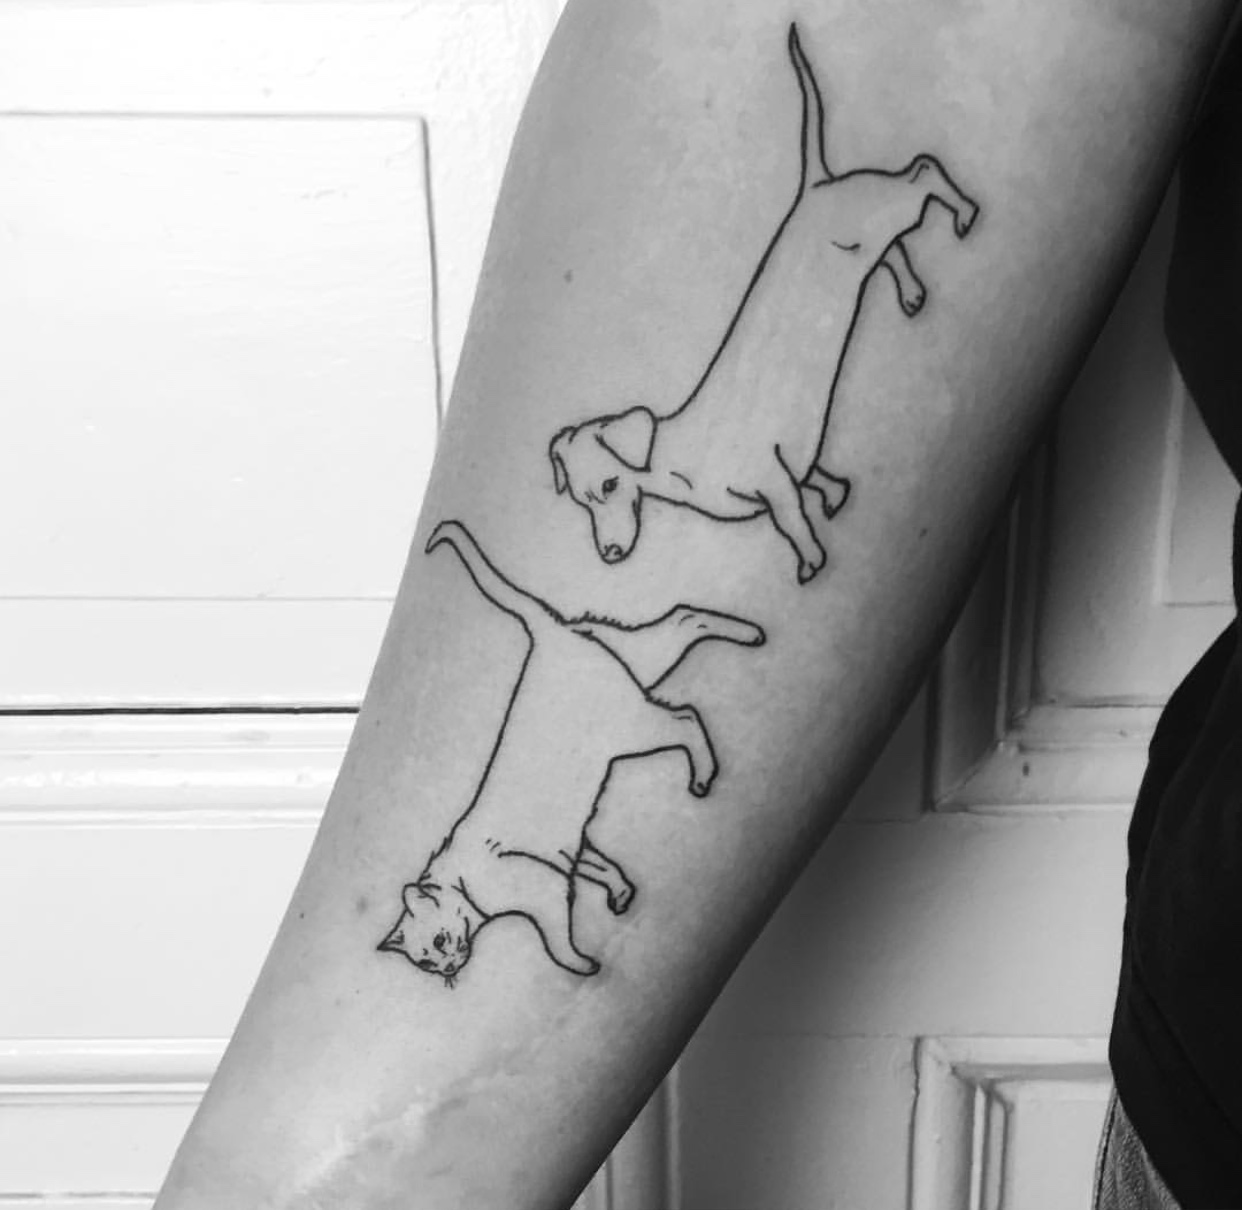 Dachshund and cat tattoo on arm